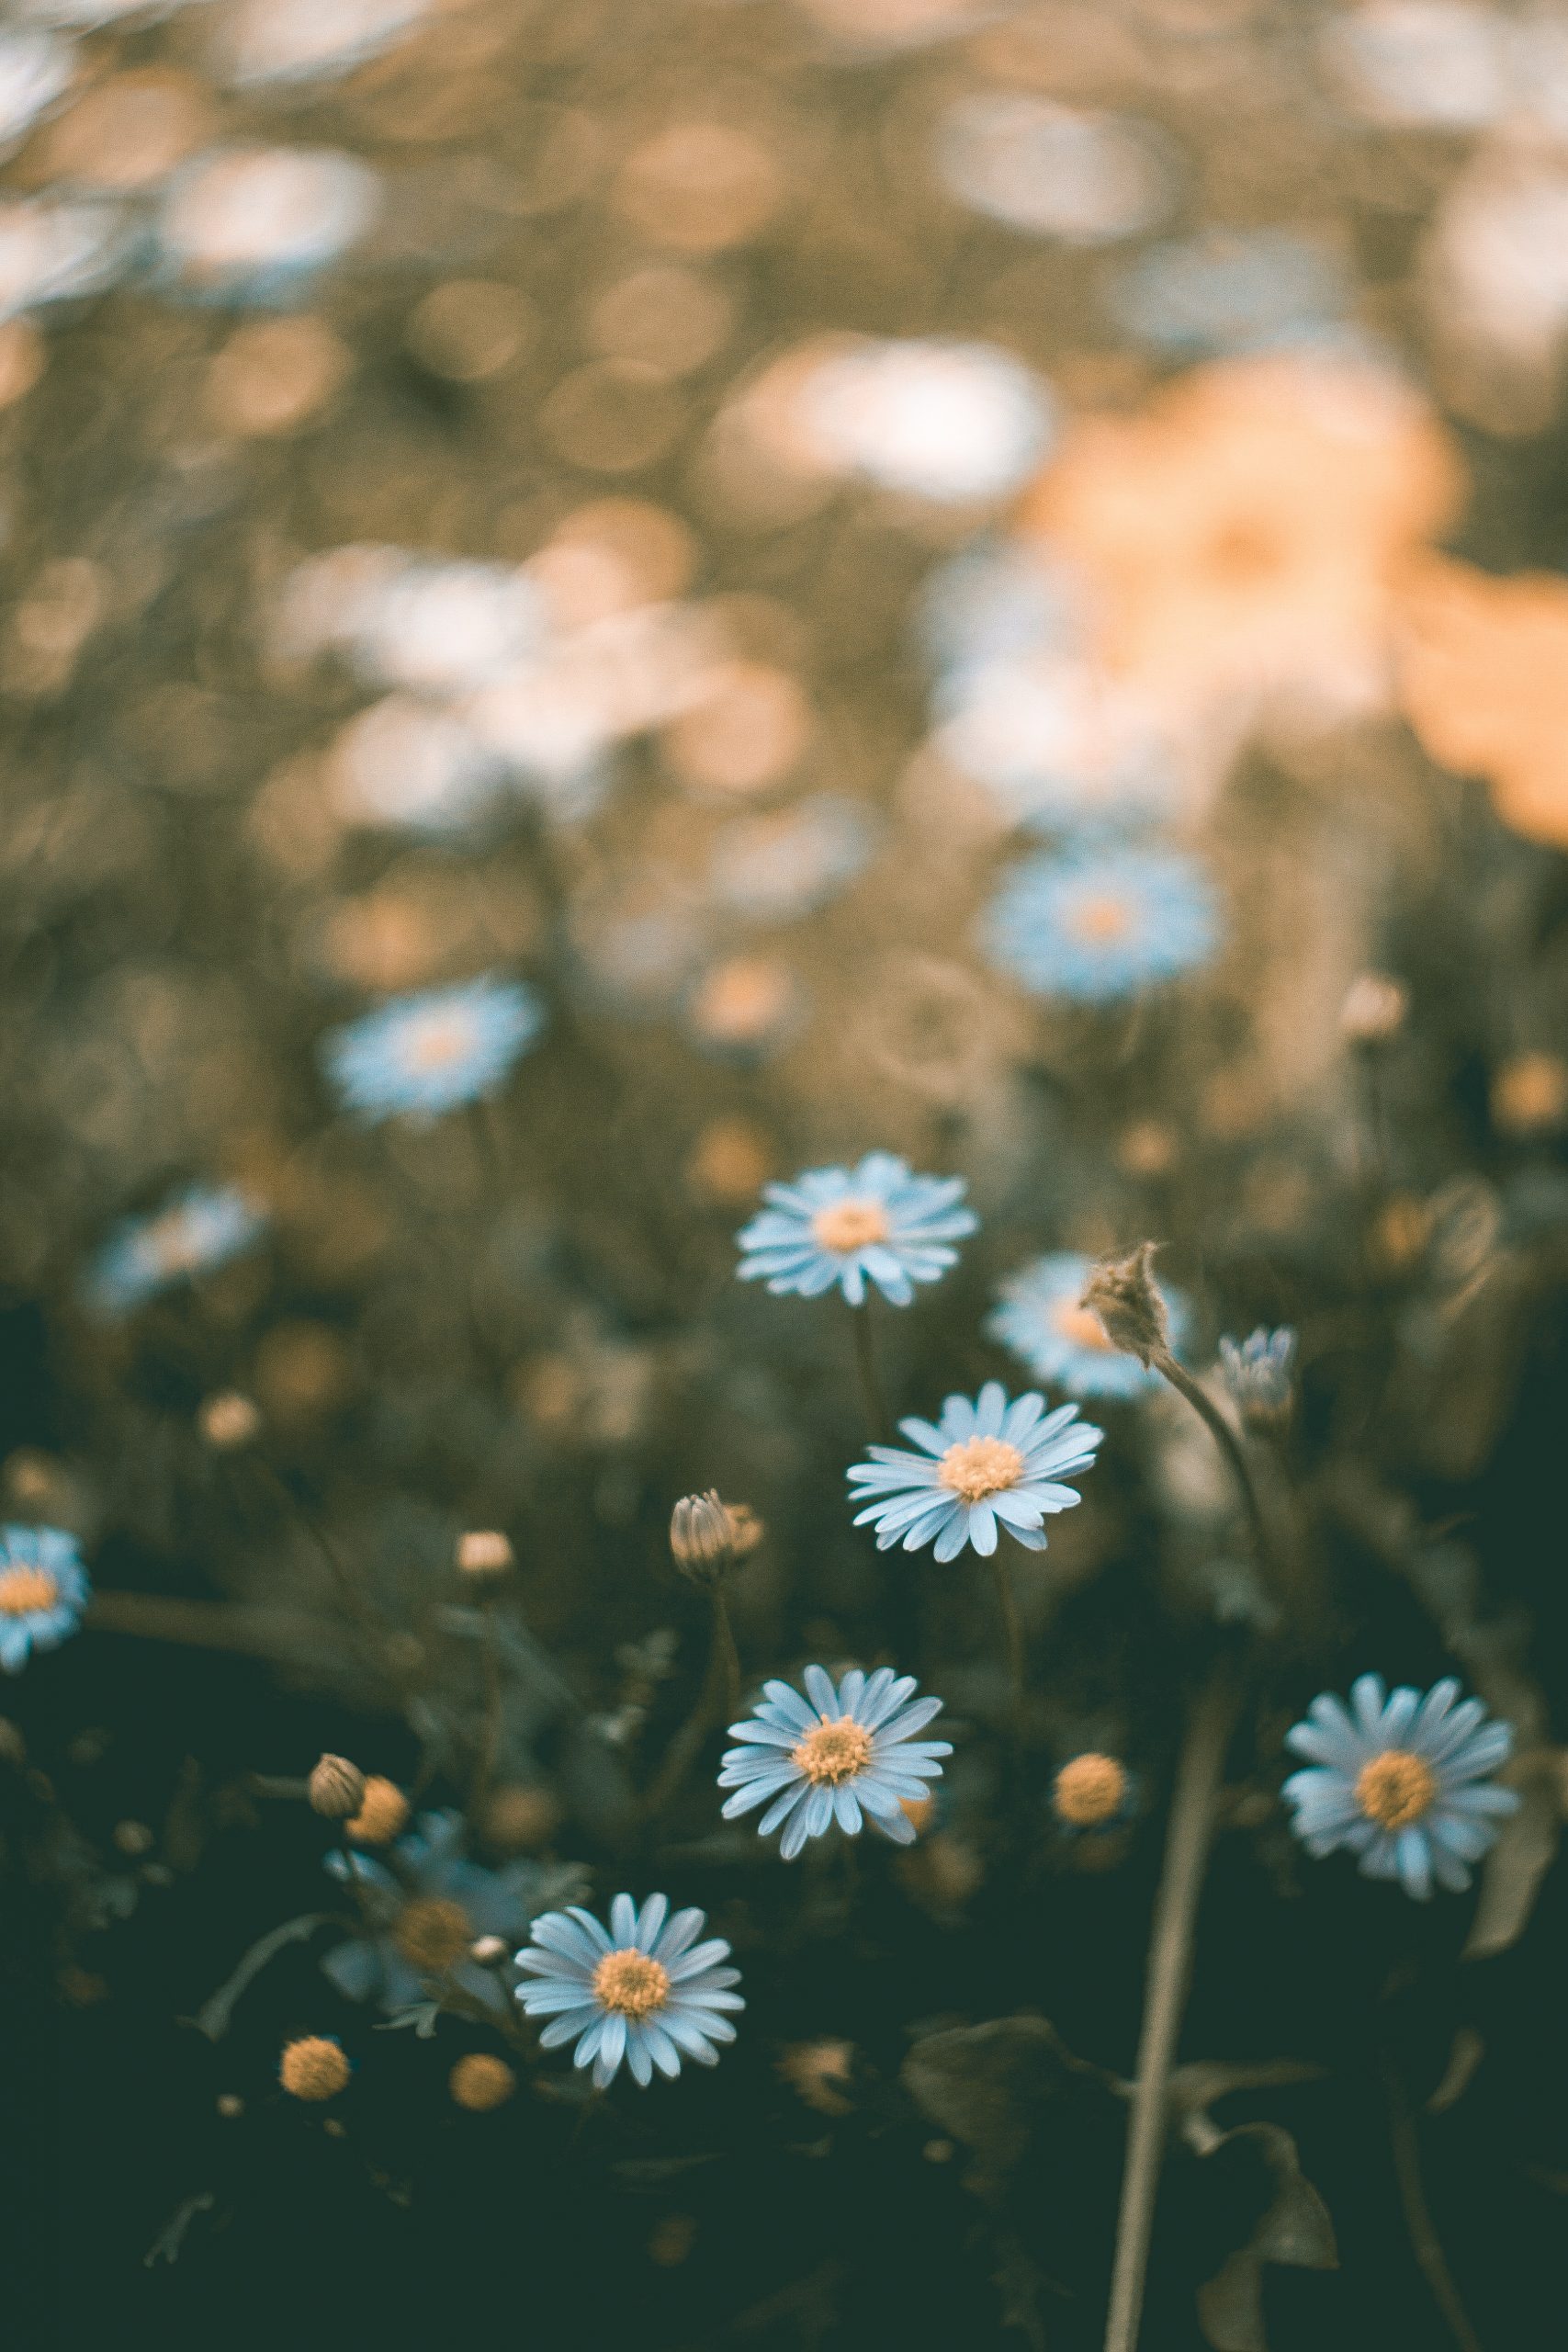 A close-up photograph of a cluster of daisies growing in a field. The setting sun bathes the daisies in golden light.